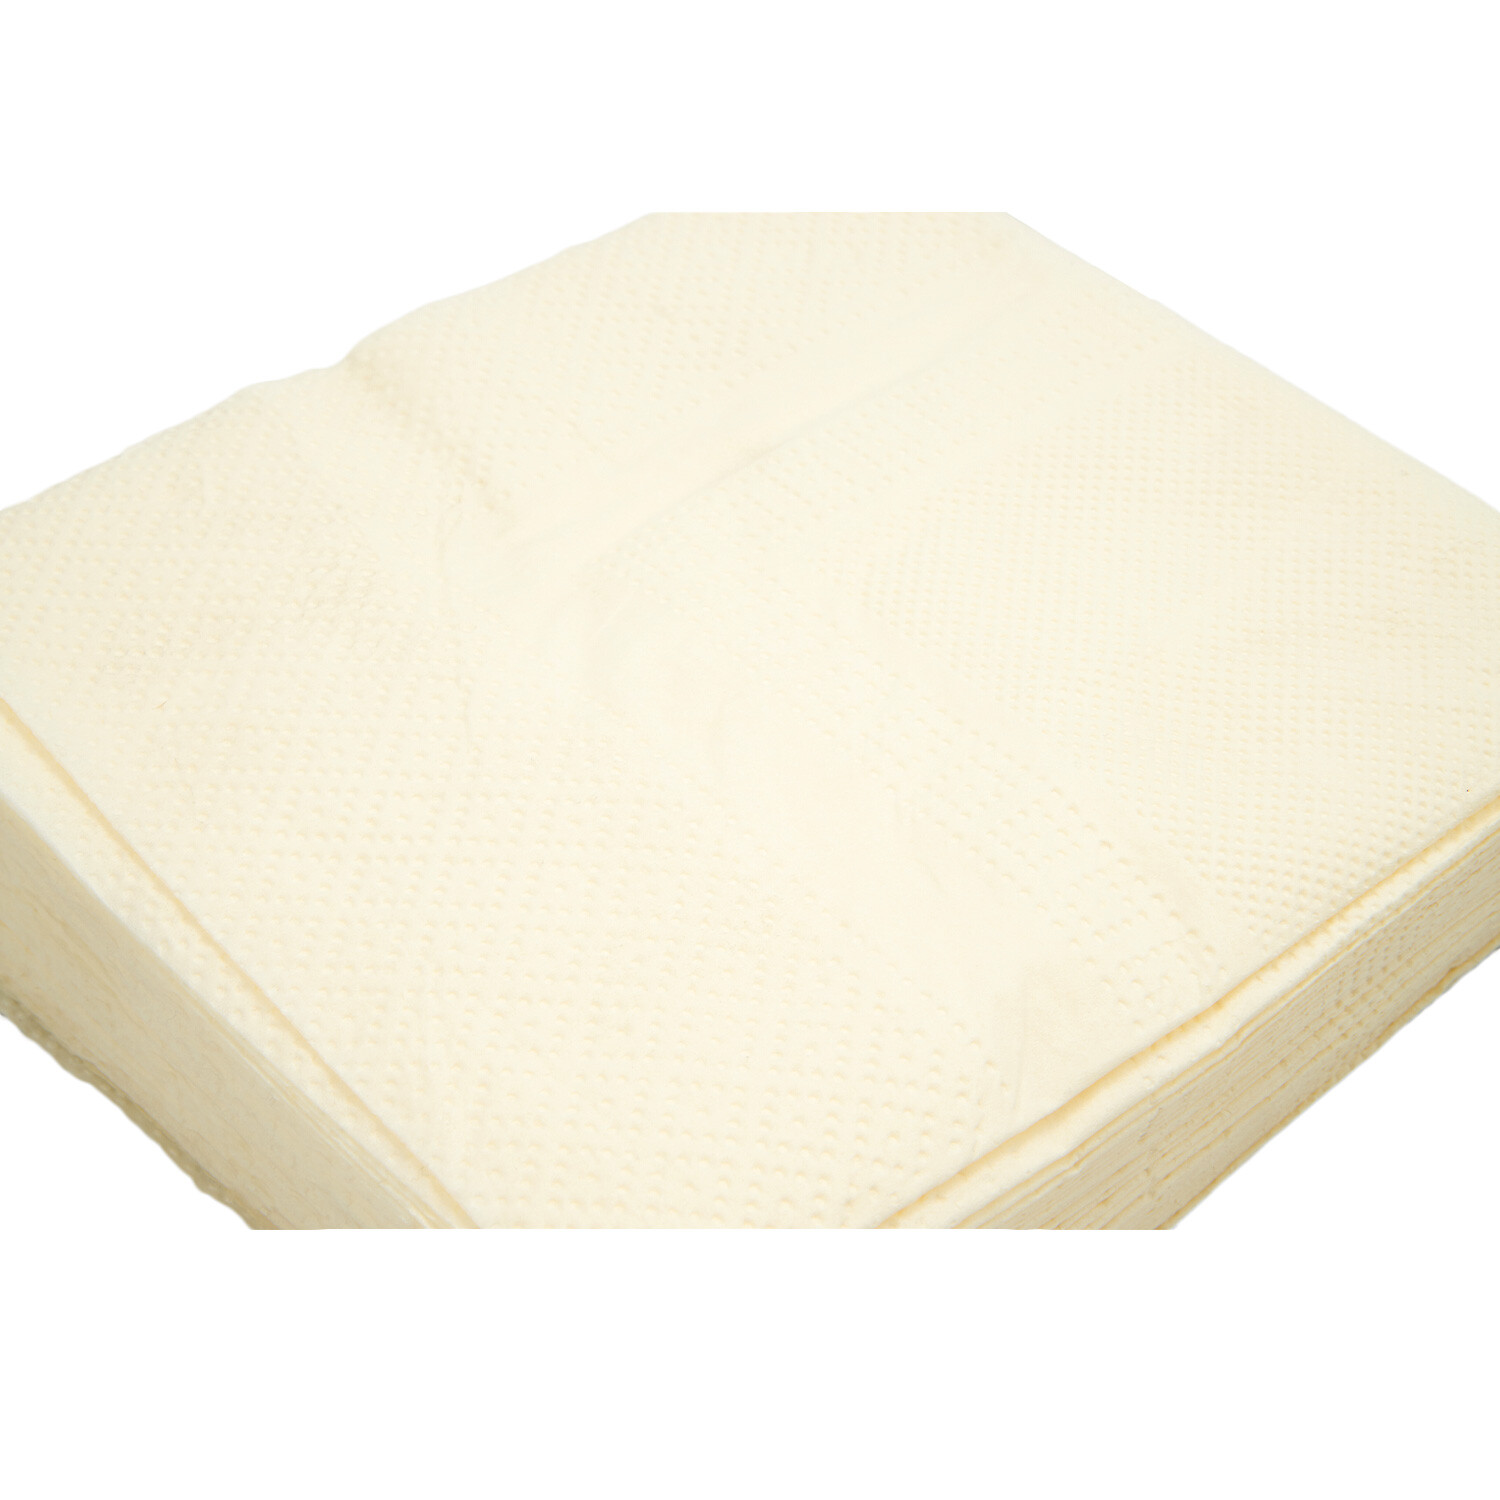 Pack of My Home Napkins - Cream Image 2